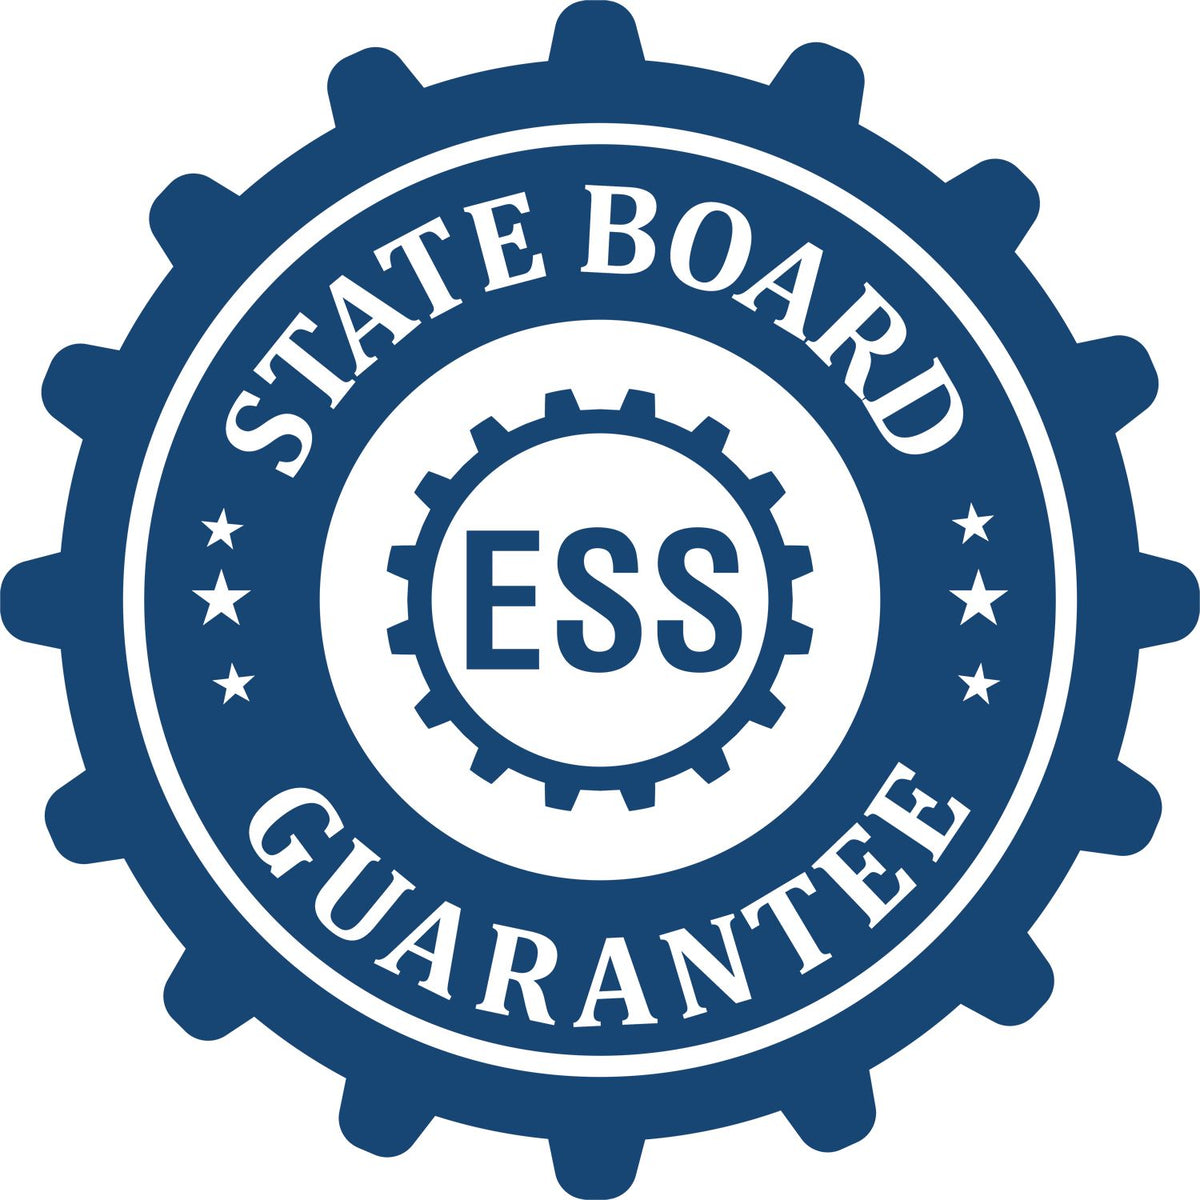 An emblem in a gear shape illustrating a state board guarantee for the Hybrid New Mexico Engineer Seal